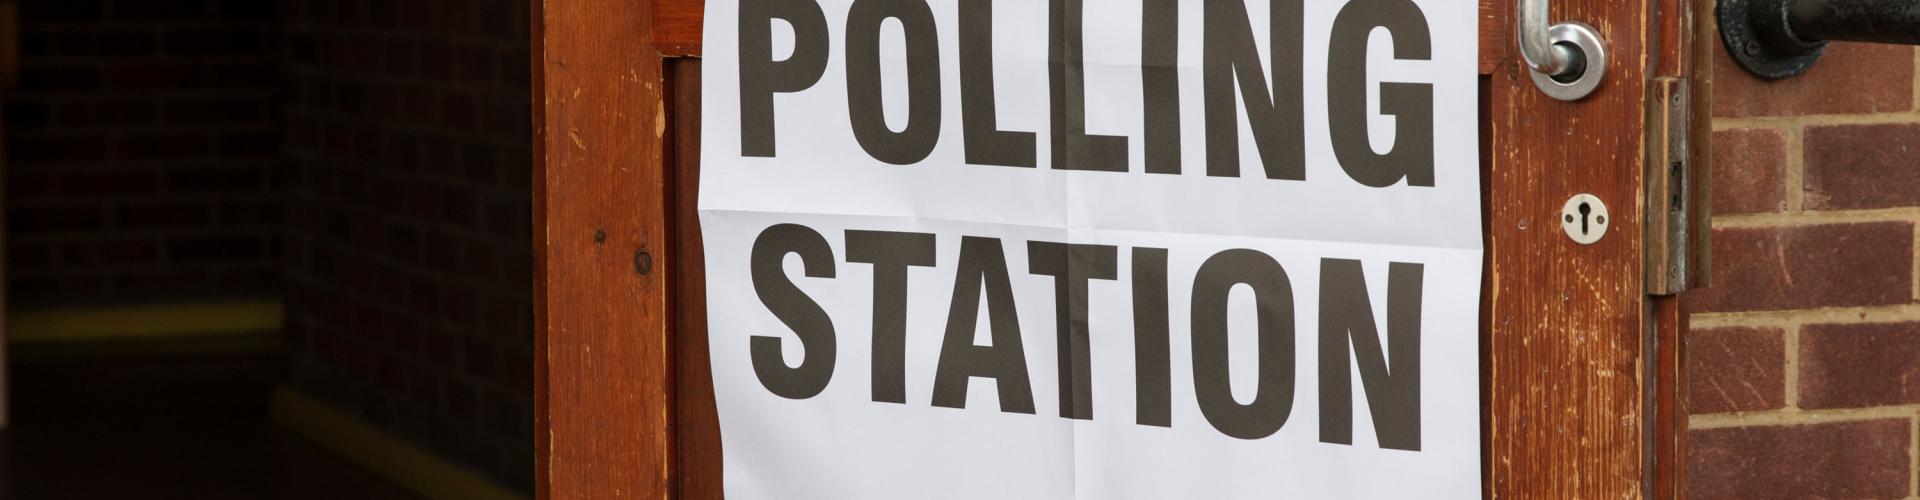 Polling station sign on a door